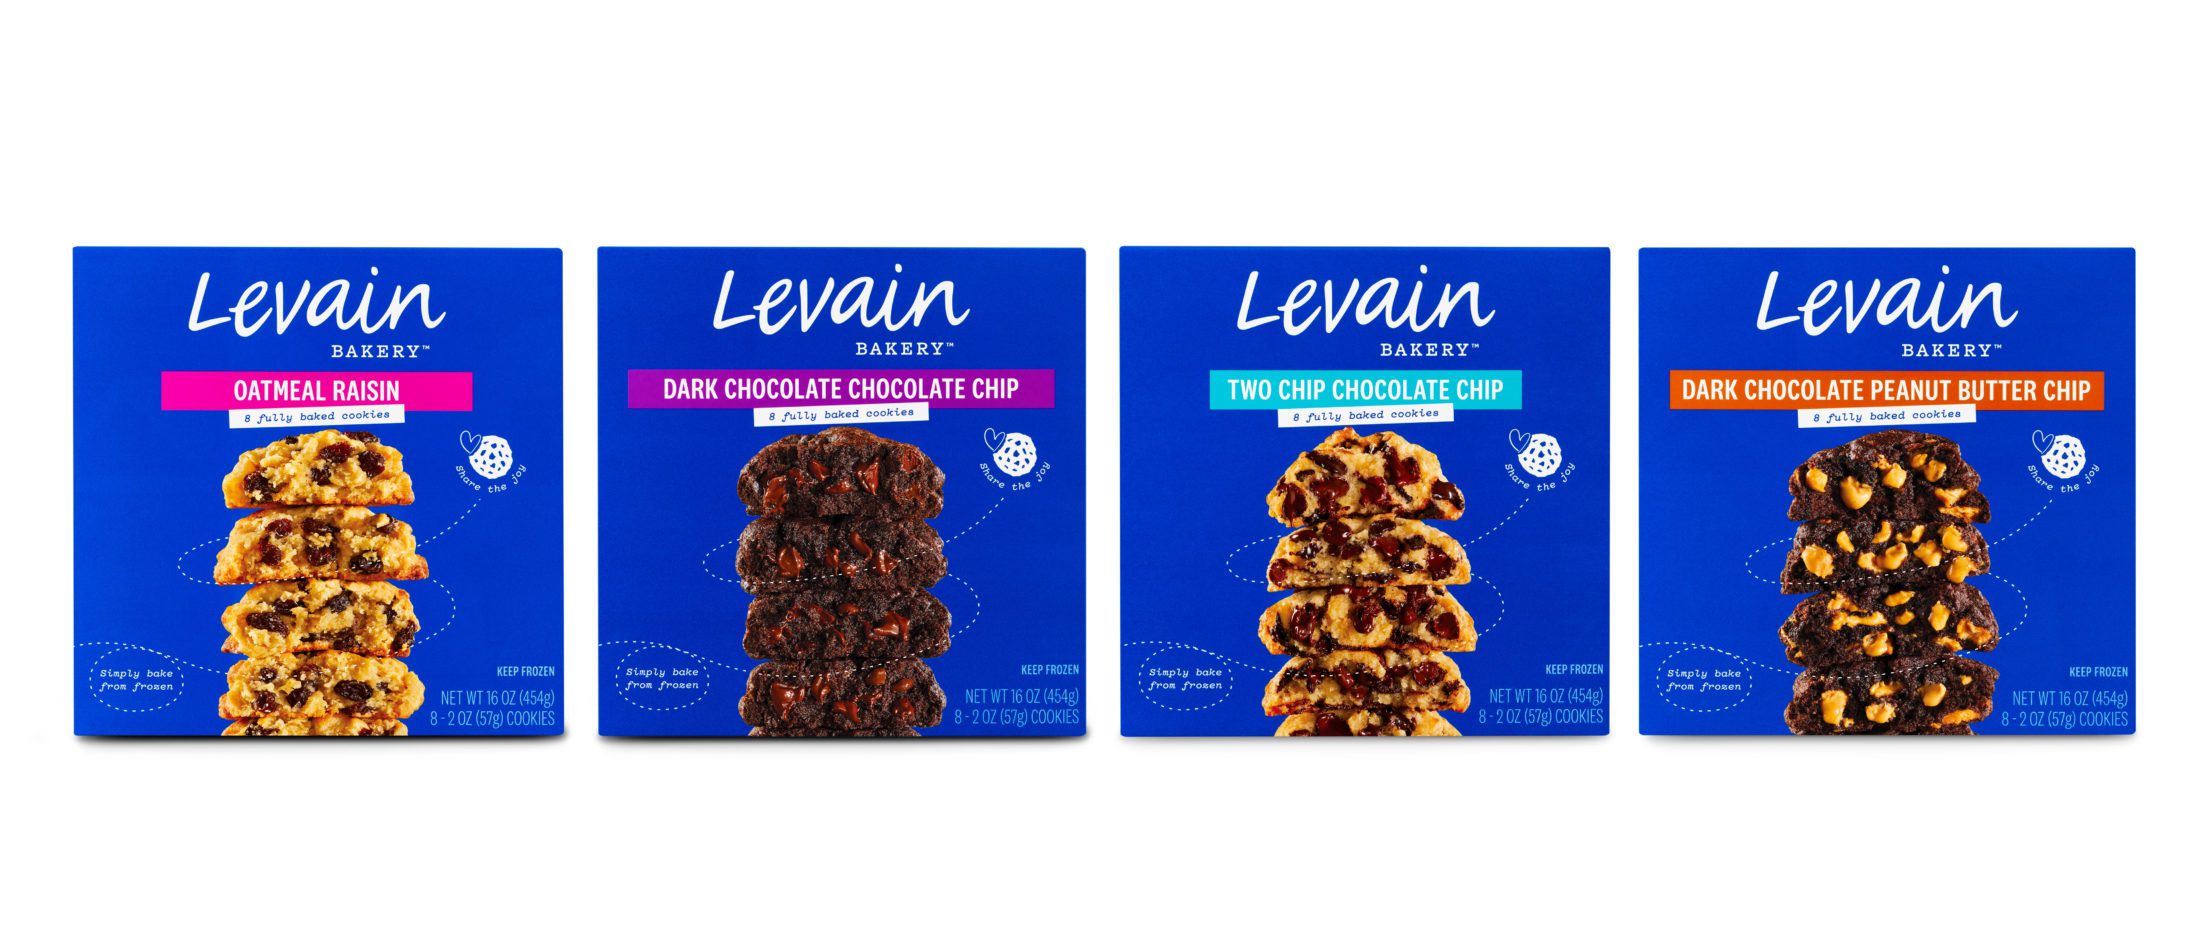 Four front facing boxes of Levain Bakery Frozen Cookies. Flavors in order from left to right, Oatmeal Raisin, Dark Chocolate Chocolate Chip, Two Chip Chocolate Chip, Dark Chocolate Peanut Butter Chip.